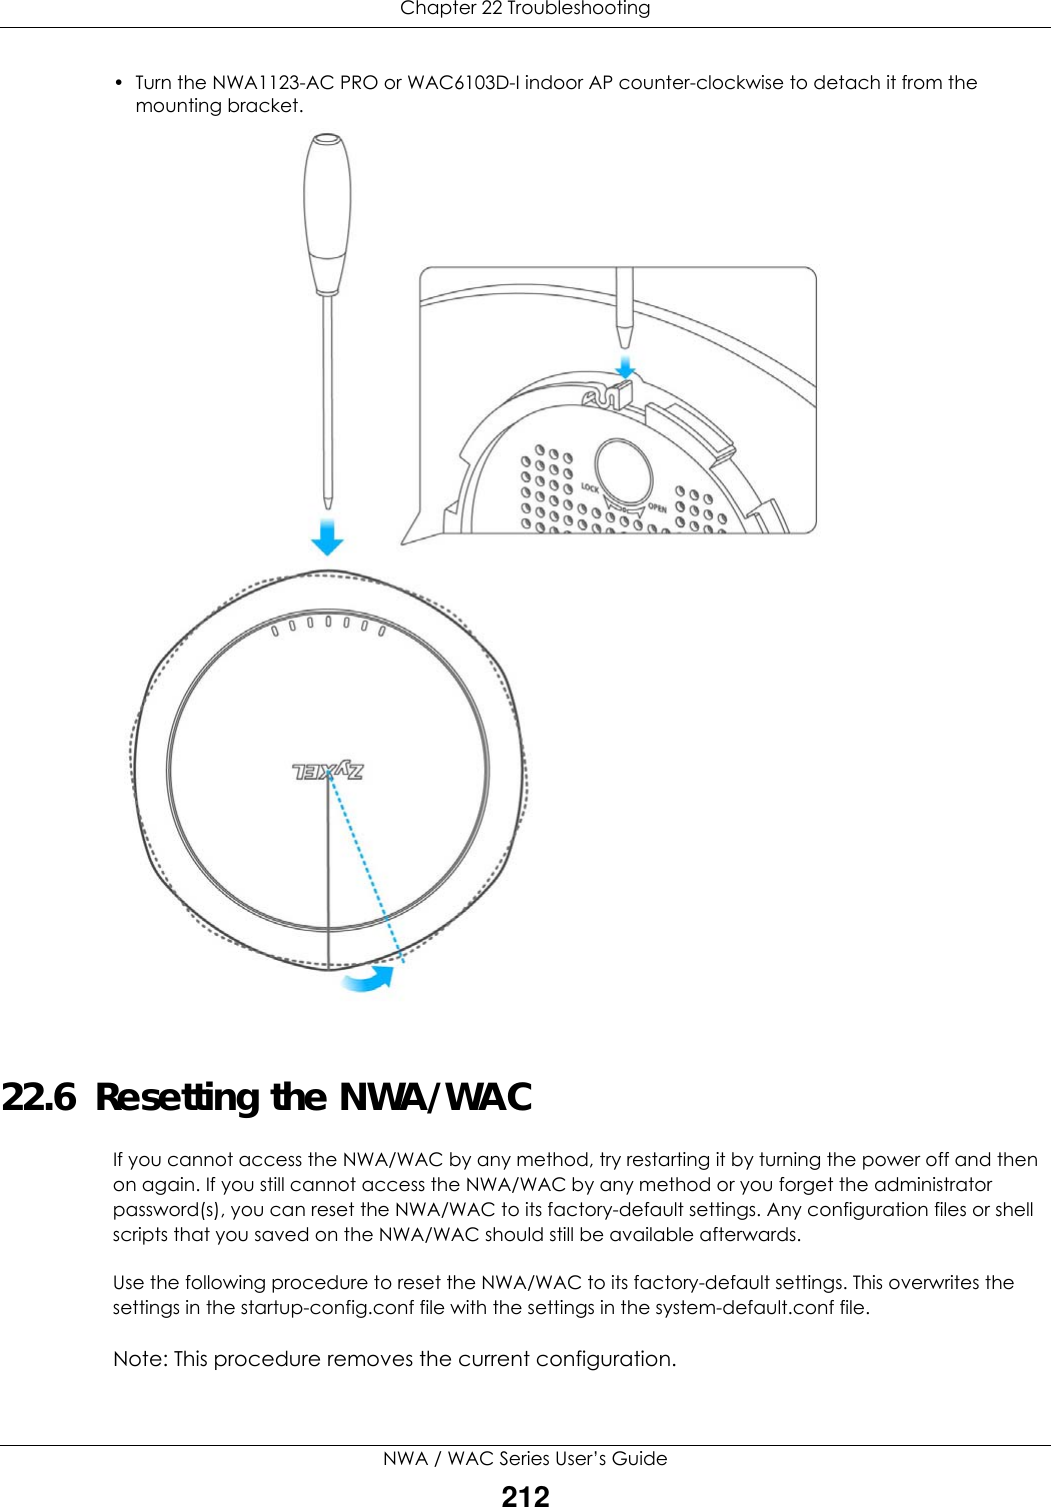 Chapter 22 TroubleshootingNWA / WAC Series User’s Guide212• Turn the NWA1123-AC PRO or WAC6103D-I indoor AP counter-clockwise to detach it from the mounting bracket.  22.6  Resetting the NWA/WACIf you cannot access the NWA/WAC by any method, try restarting it by turning the power off and then on again. If you still cannot access the NWA/WAC by any method or you forget the administrator password(s), you can reset the NWA/WAC to its factory-default settings. Any configuration files or shell scripts that you saved on the NWA/WAC should still be available afterwards.Use the following procedure to reset the NWA/WAC to its factory-default settings. This overwrites the settings in the startup-config.conf file with the settings in the system-default.conf file. Note: This procedure removes the current configuration. 